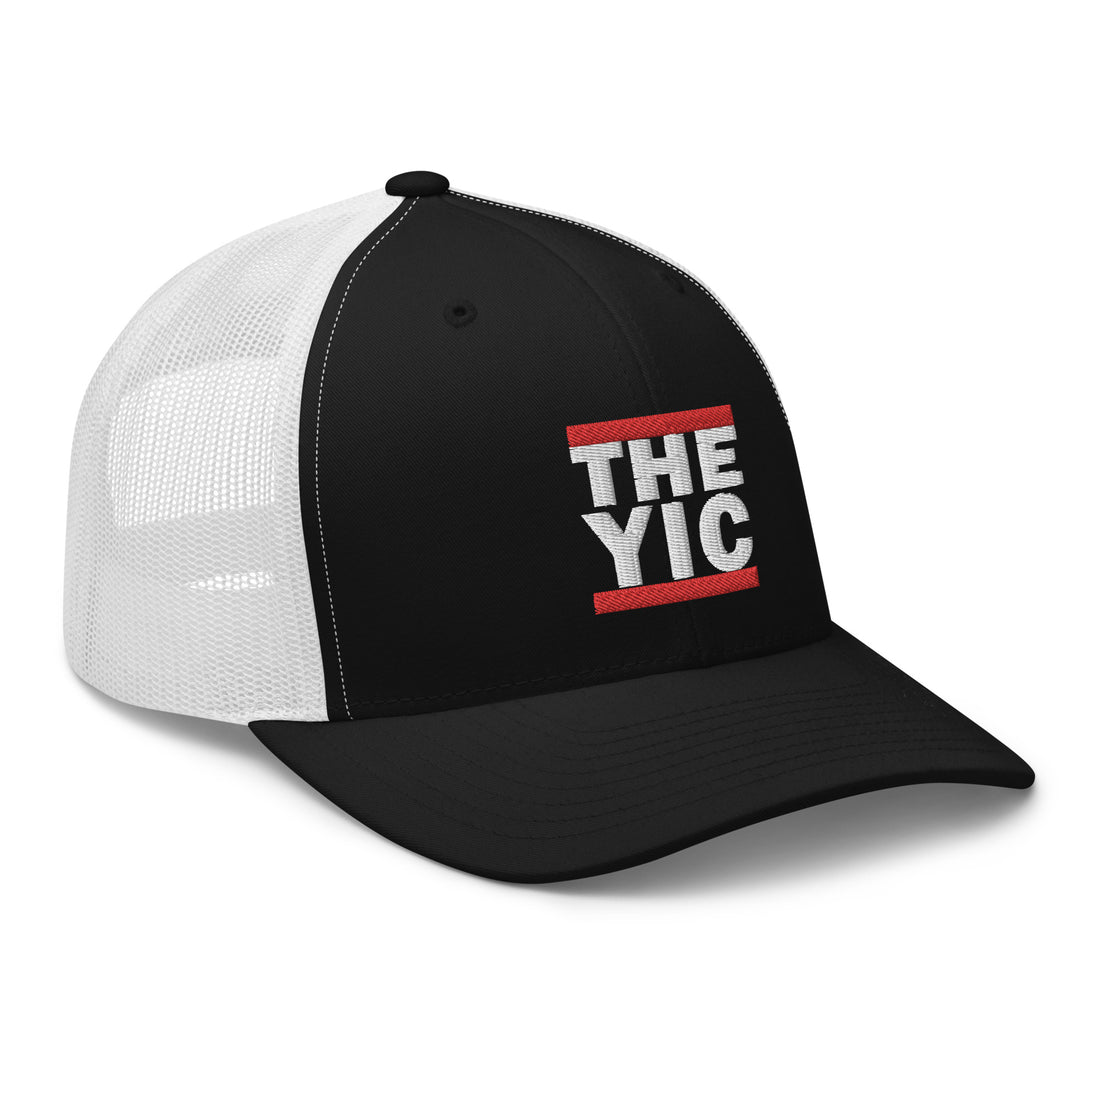 Youngest In Charge Trucker Cap